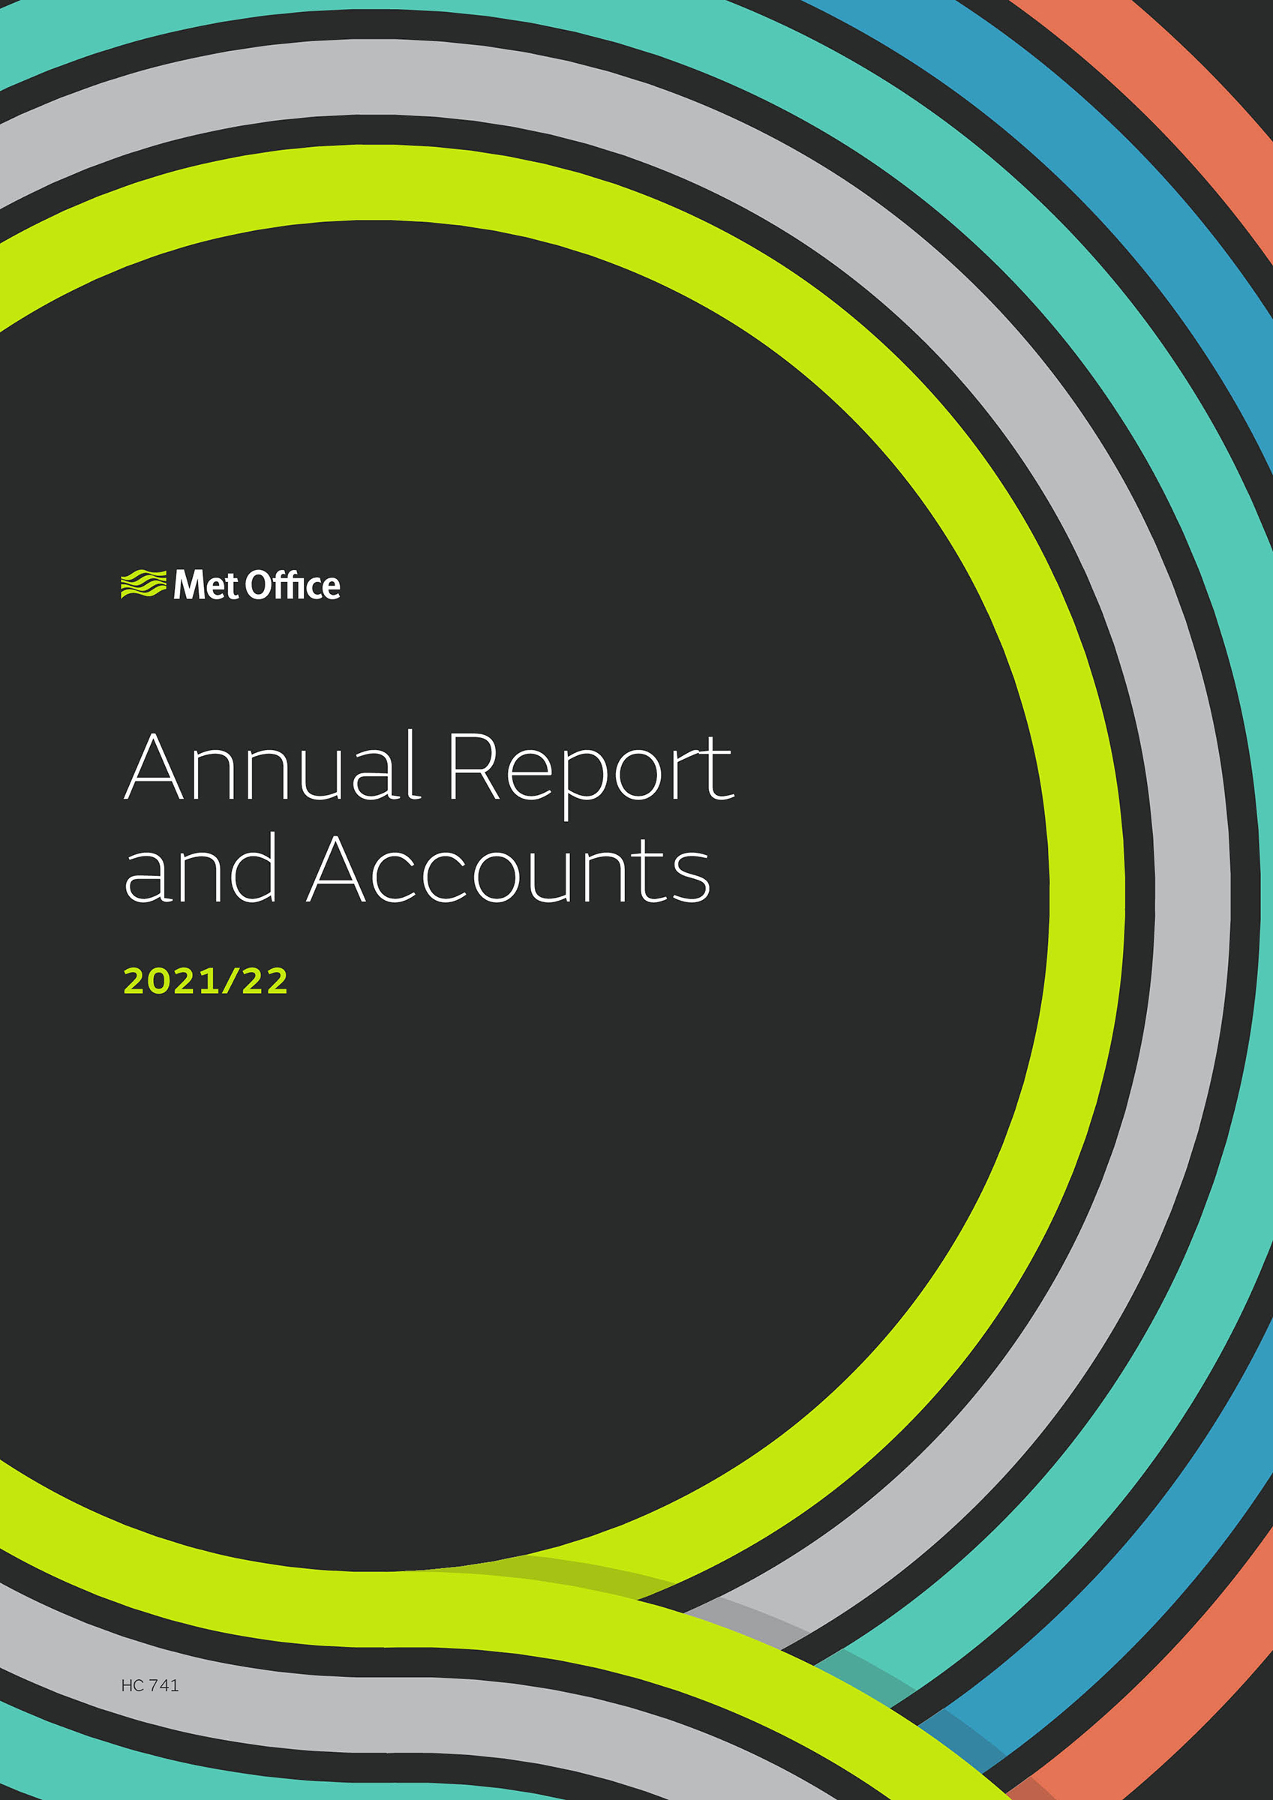 Front page of the 2022 Annual Report & Accounts